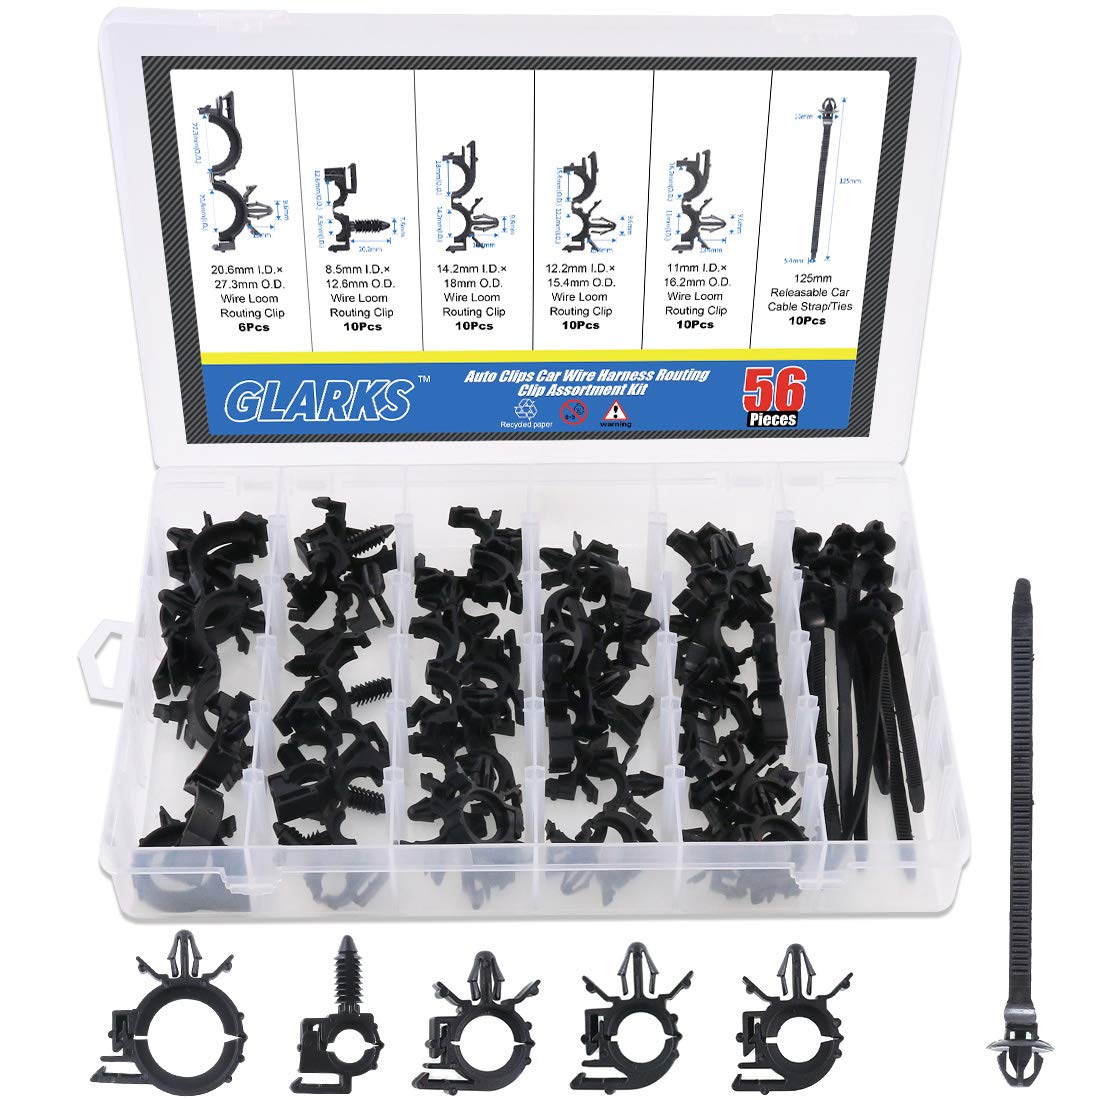 Glarks 56-Pieces Auto Clips Car Wire Harness Routing Clip Assortment Kit for Honda GM Mazda, 6 Size From 3/8" to 3/4" Loom Clips von Glarks